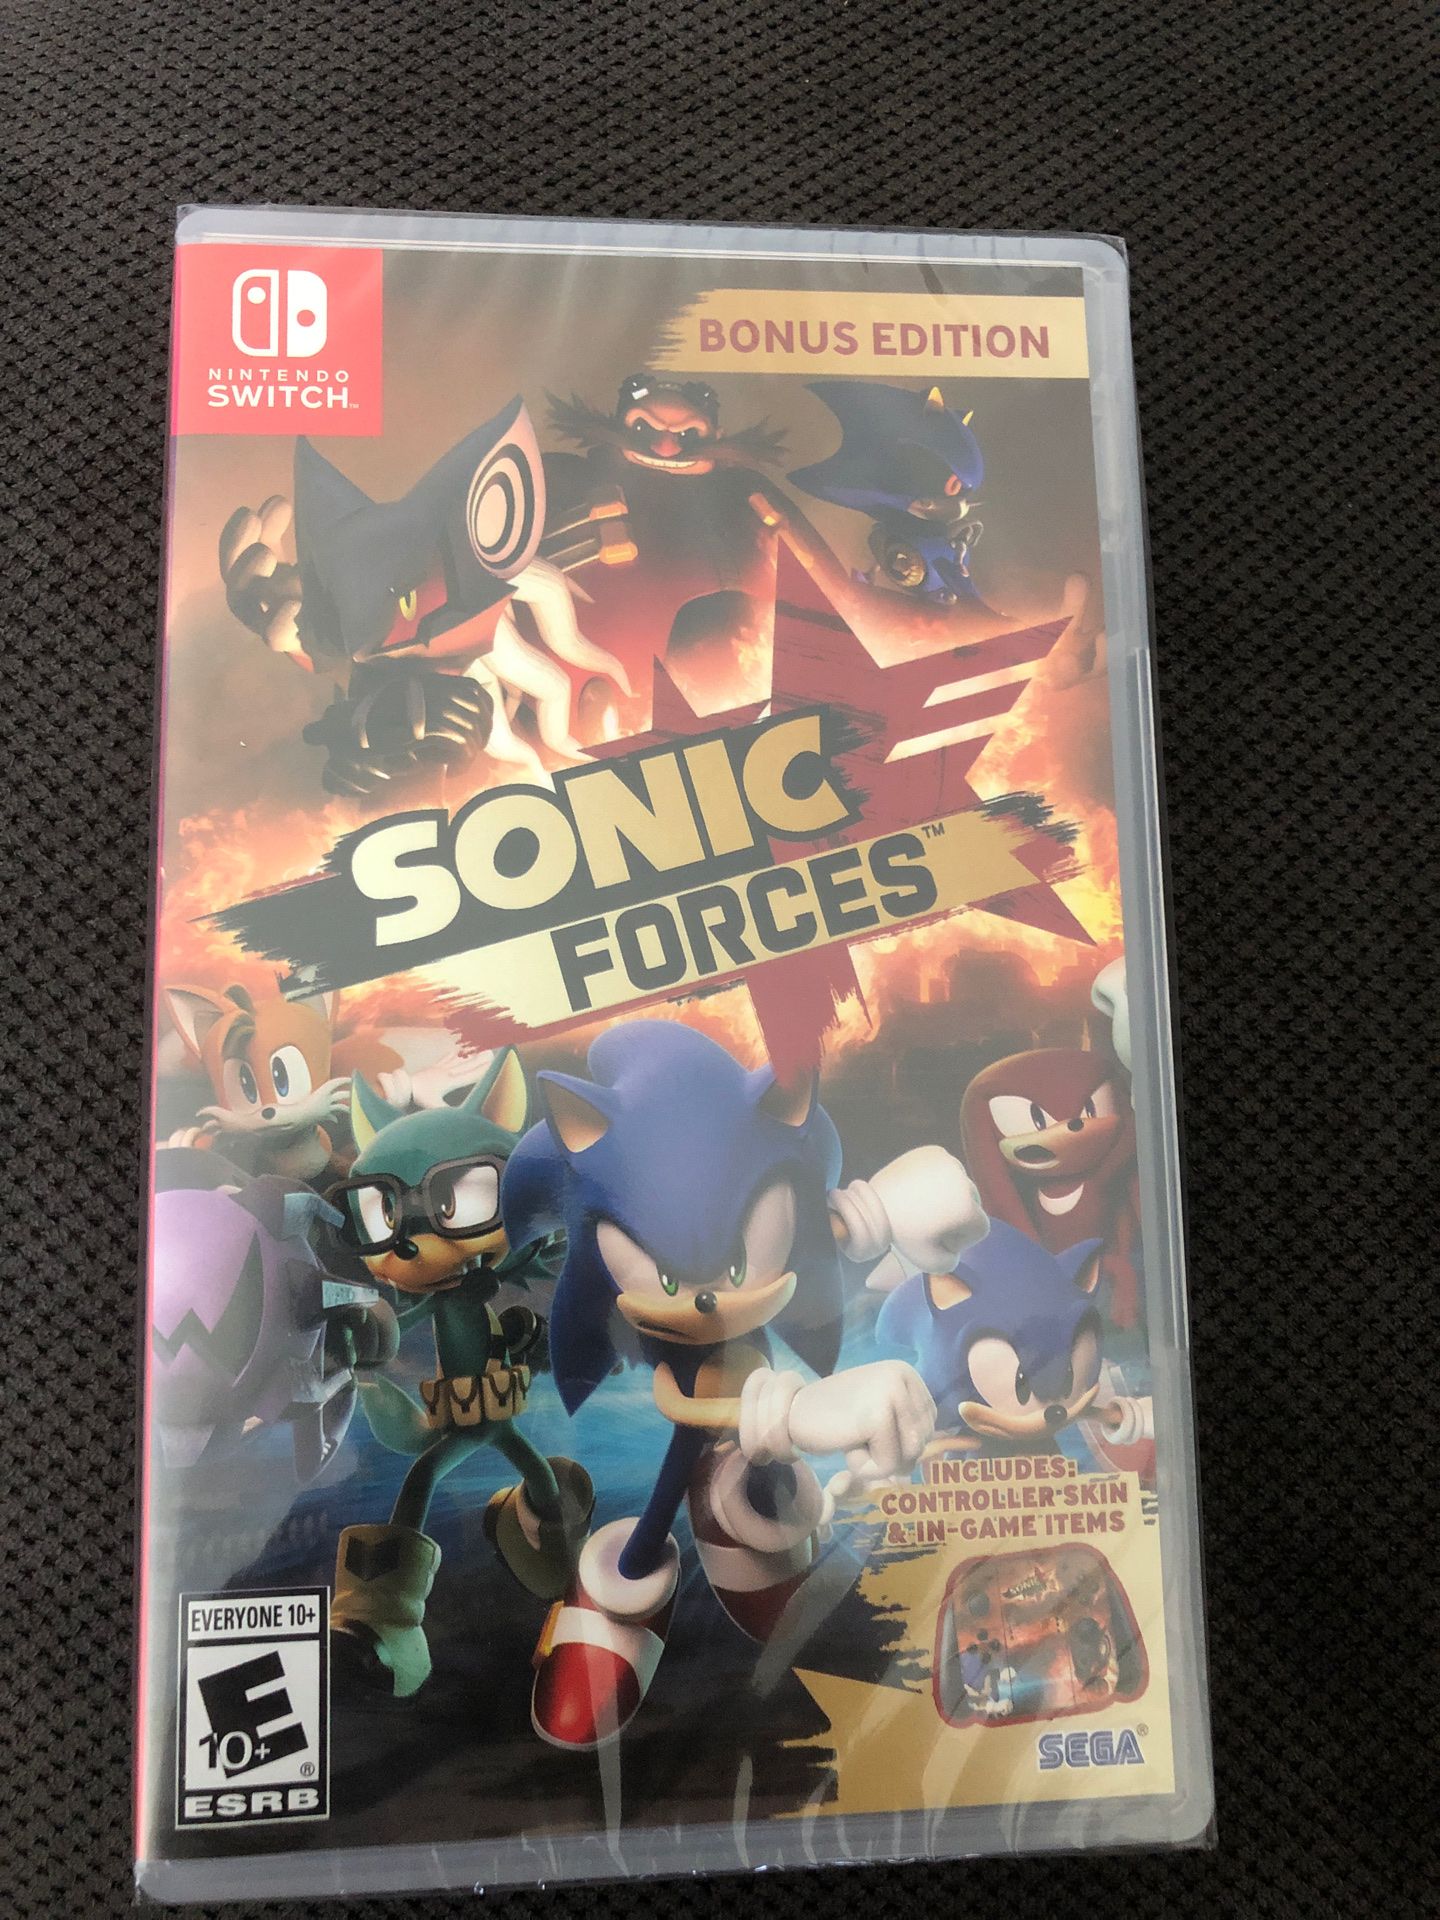 Sonic forces Nintendo Switch - $49